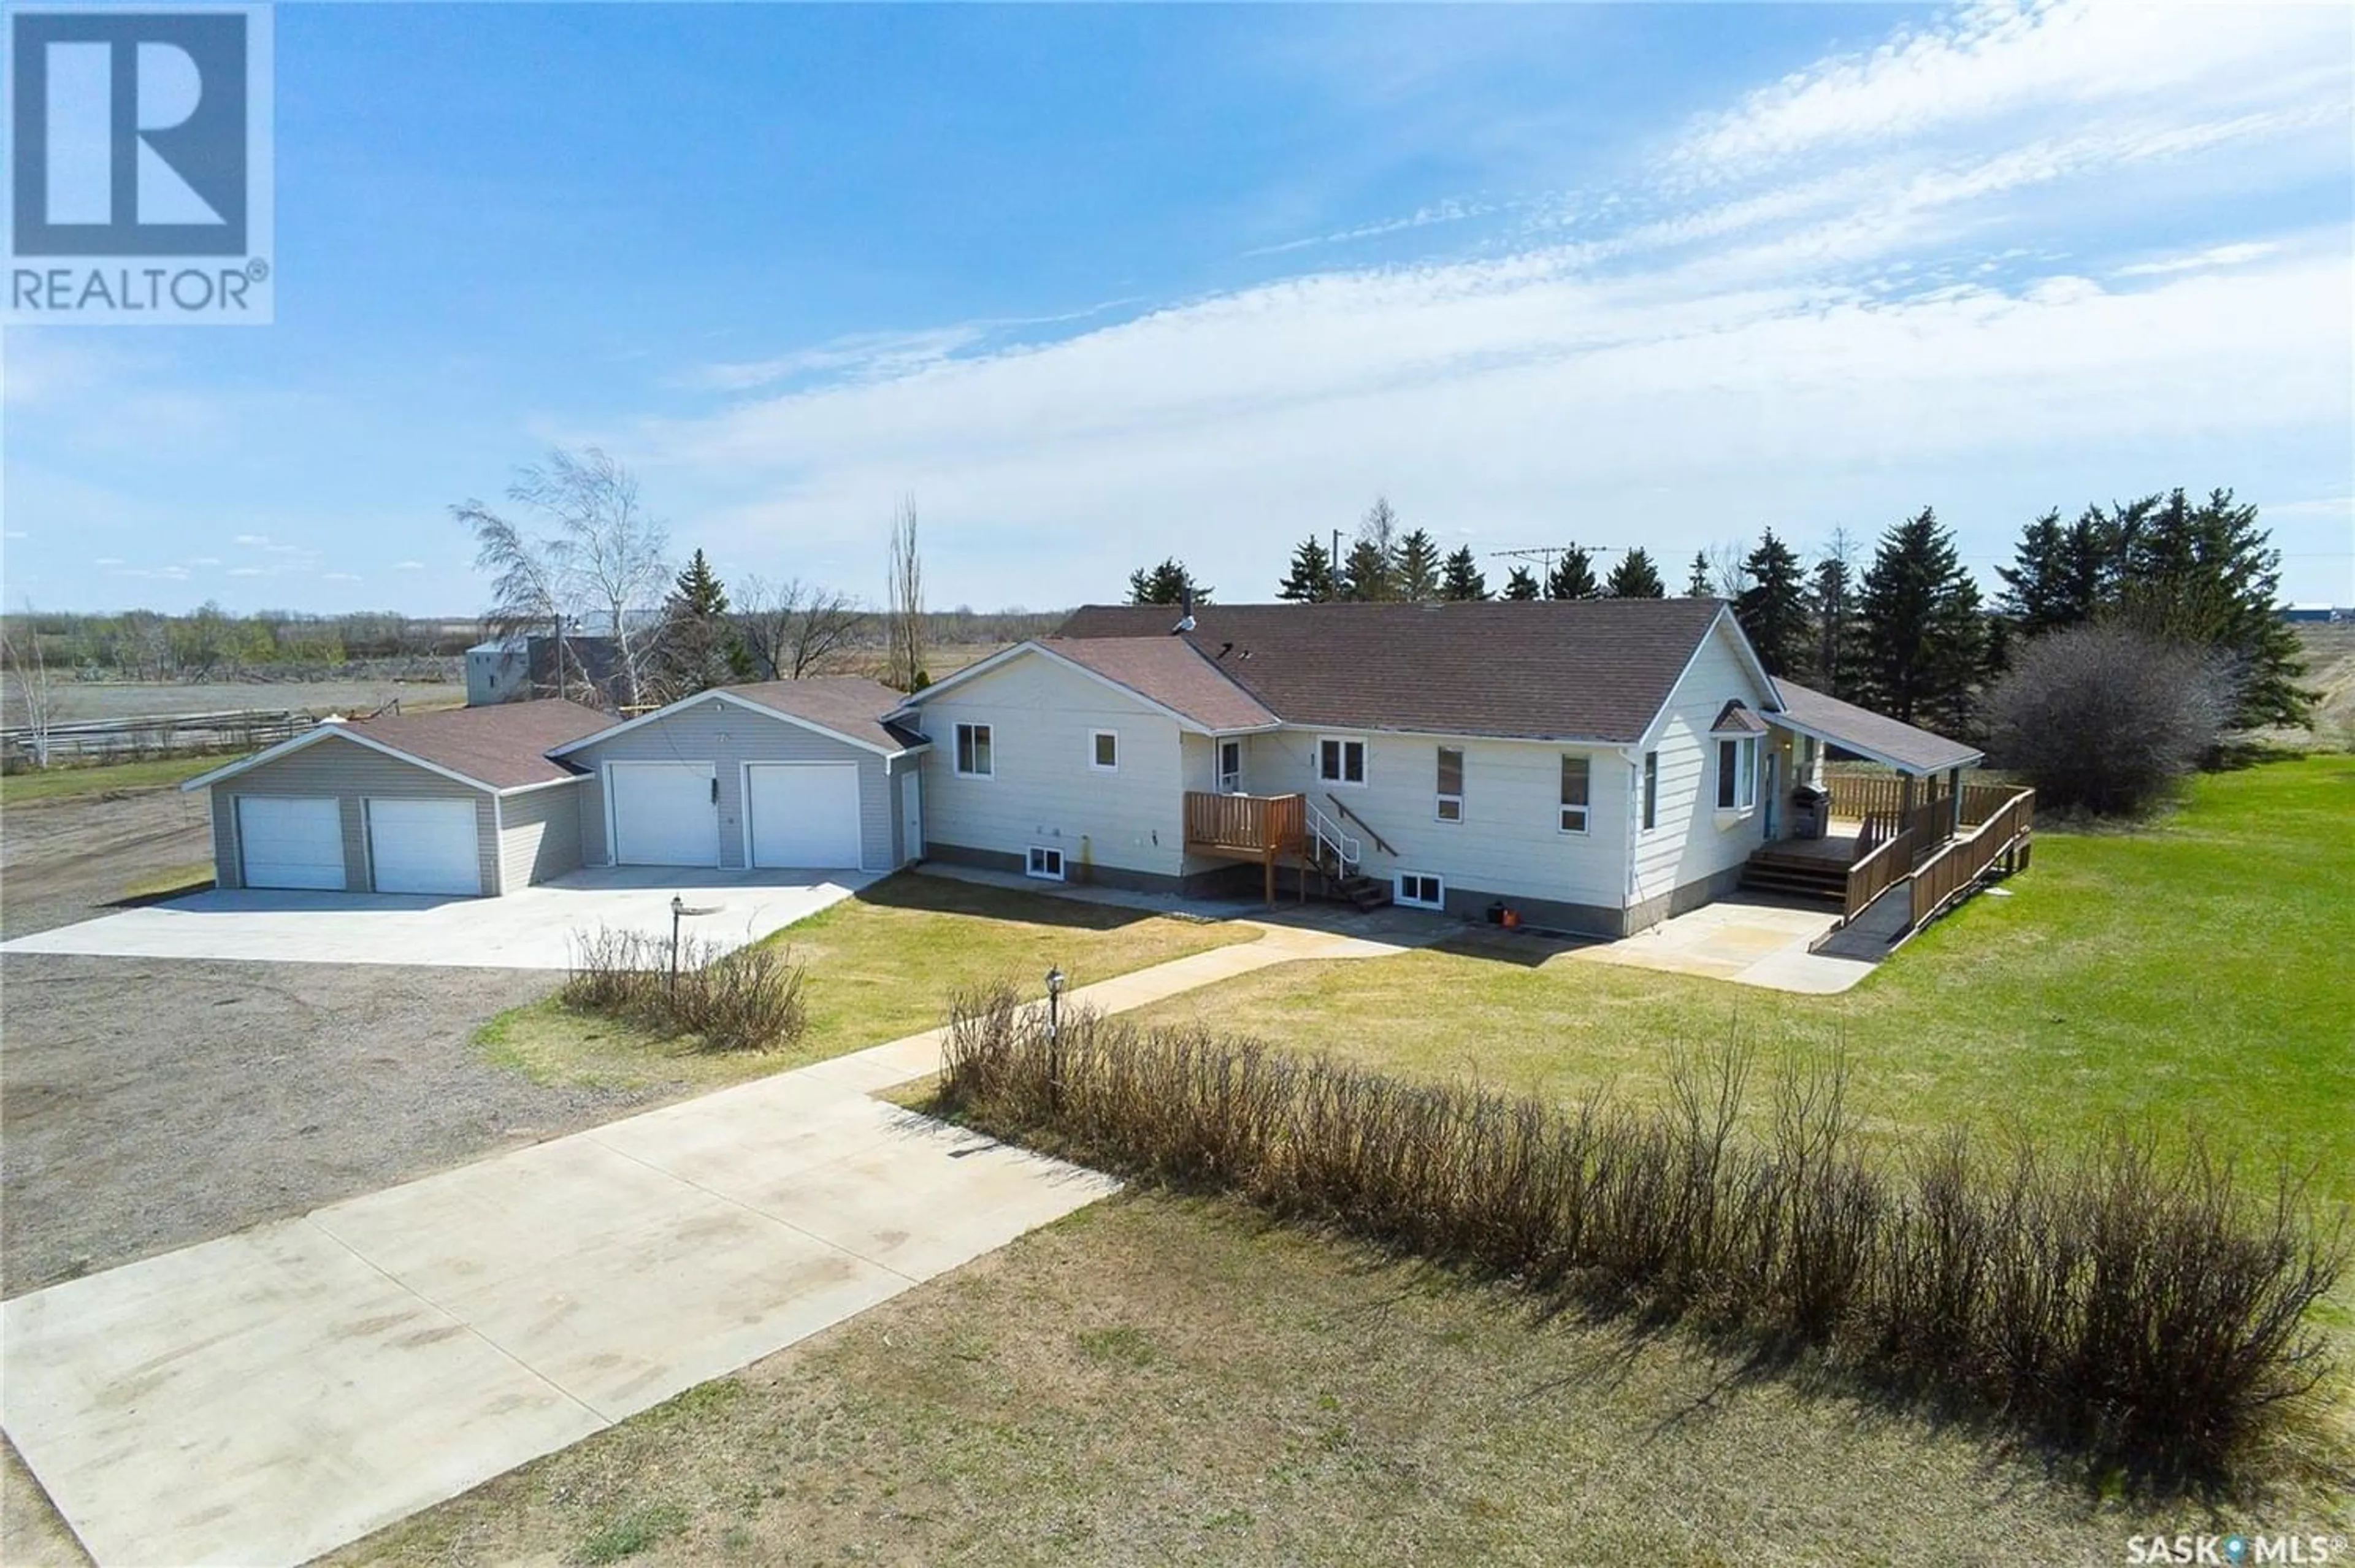 Frontside or backside of a home for W 1/2 NW 33 37 6 W3rd, Corman Park Rm No. 344 Saskatchewan S7K3J5